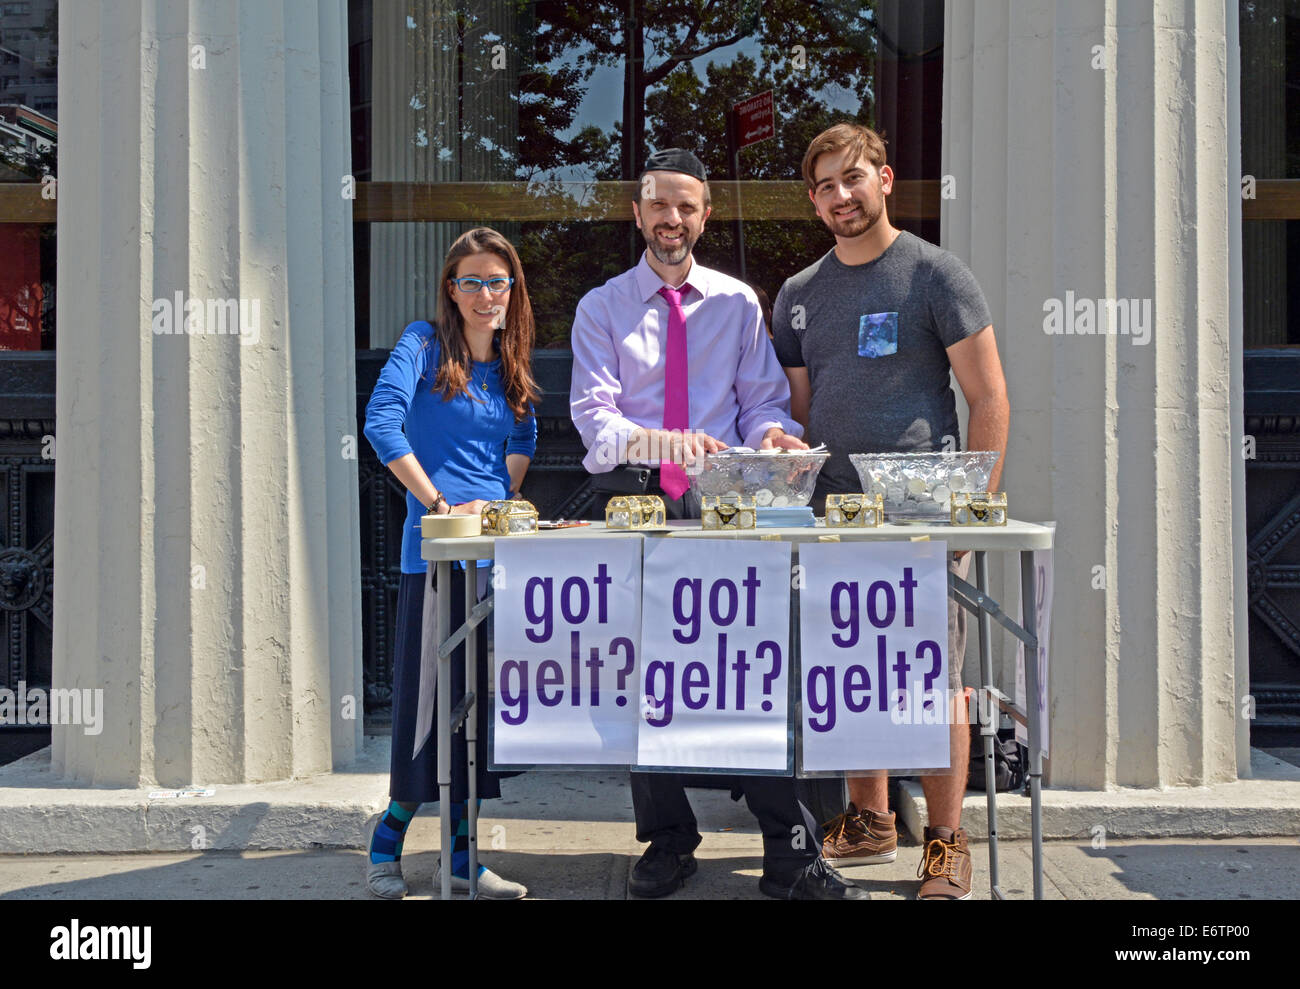 A Rabbi & helpers at a stand encouraging young people to explore ISRAEL BIRTHRIGHT, a free trip to encourage cultural connection Stock Photo